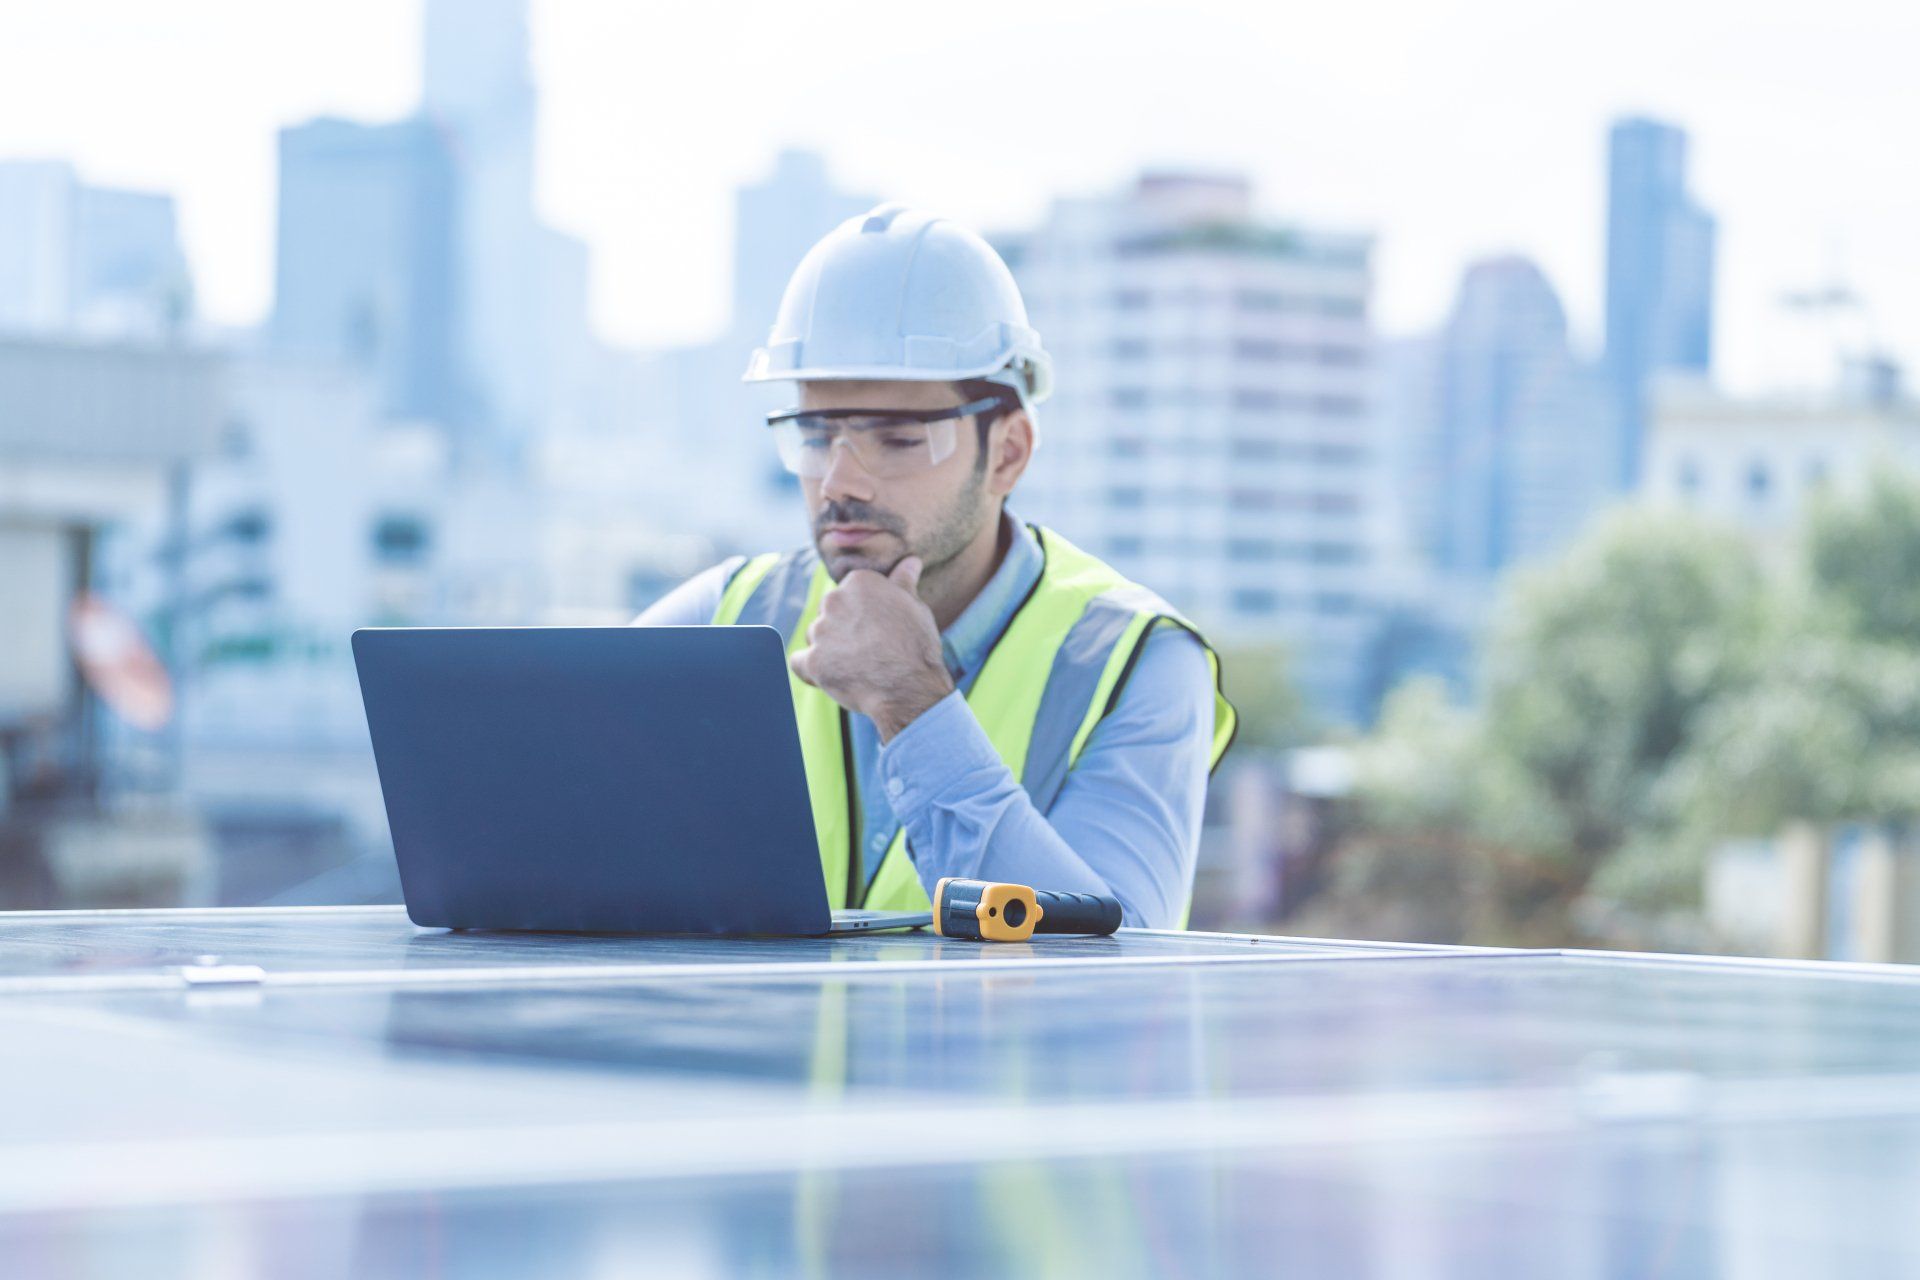 5 Reasons You Need an All-In-One Software for Setting Roofing Appointments